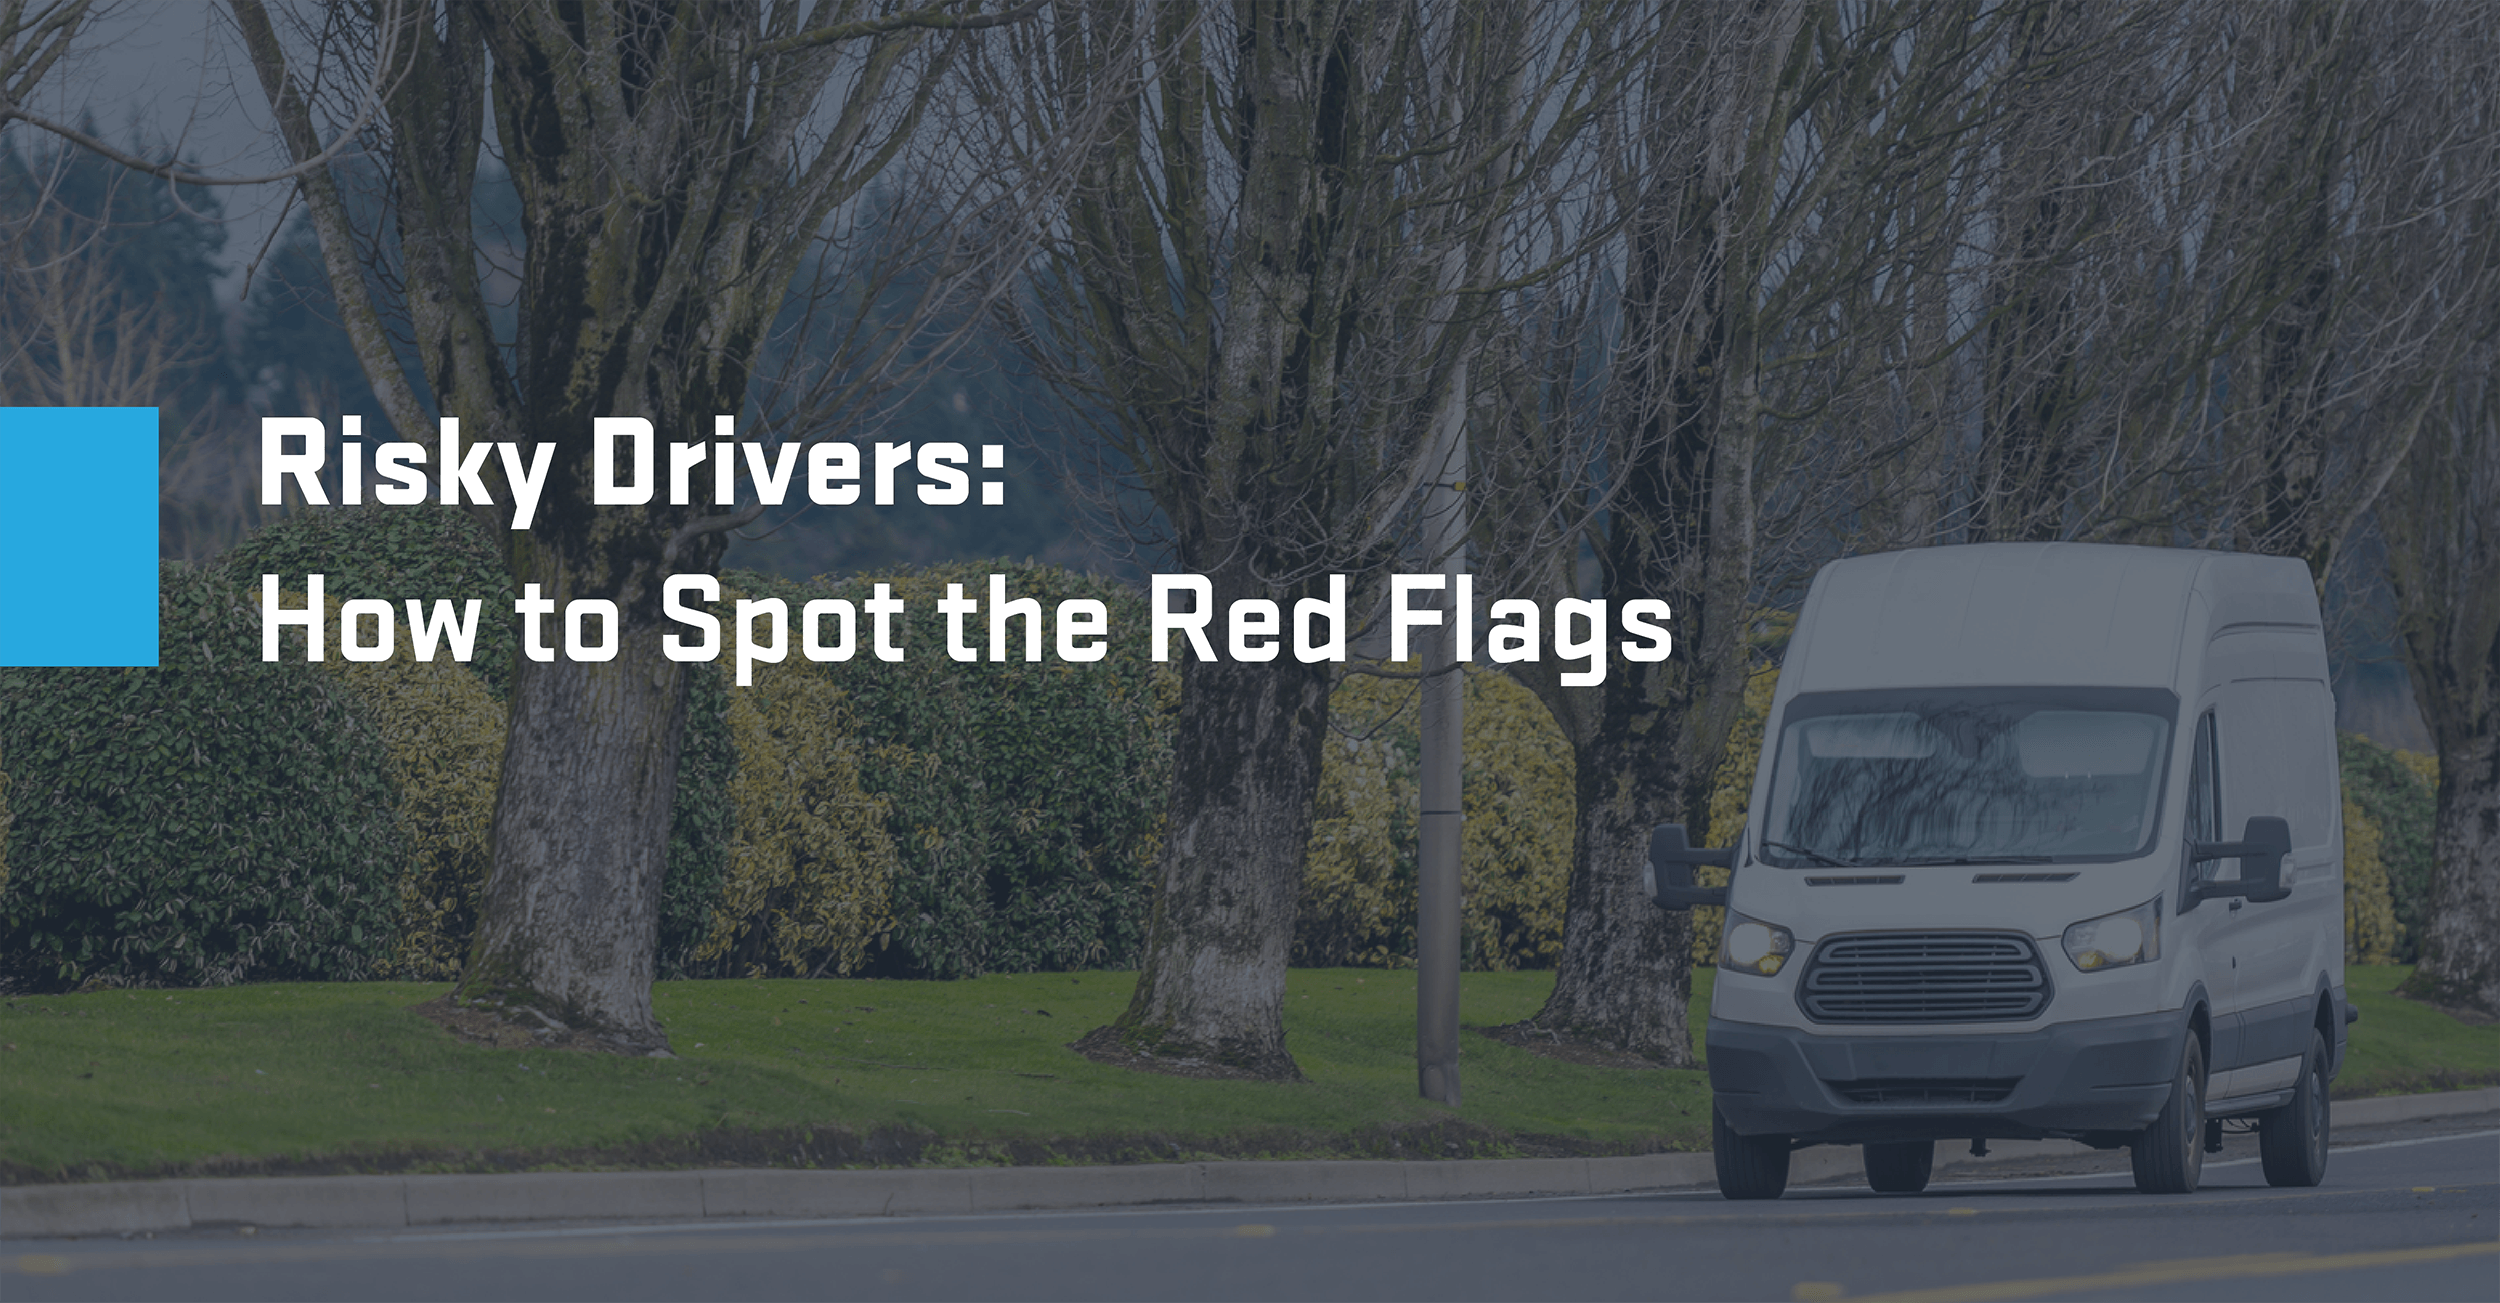 Risky Drivers: How to Spot the Red Flags